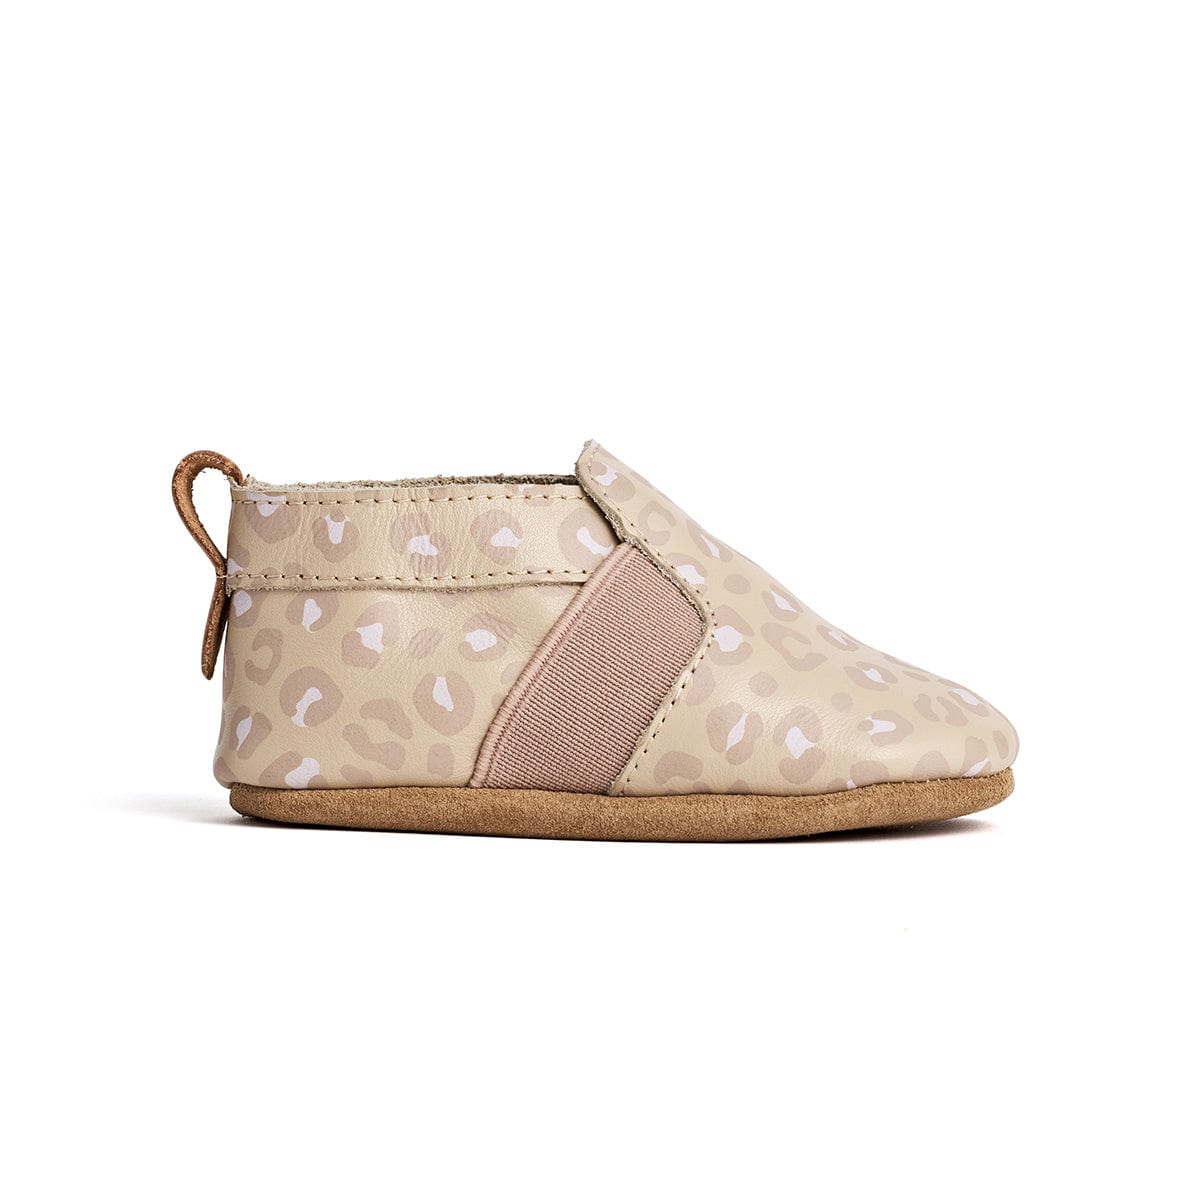 Pretty Brave Baby Shoes Slip-On in Blush Leopard